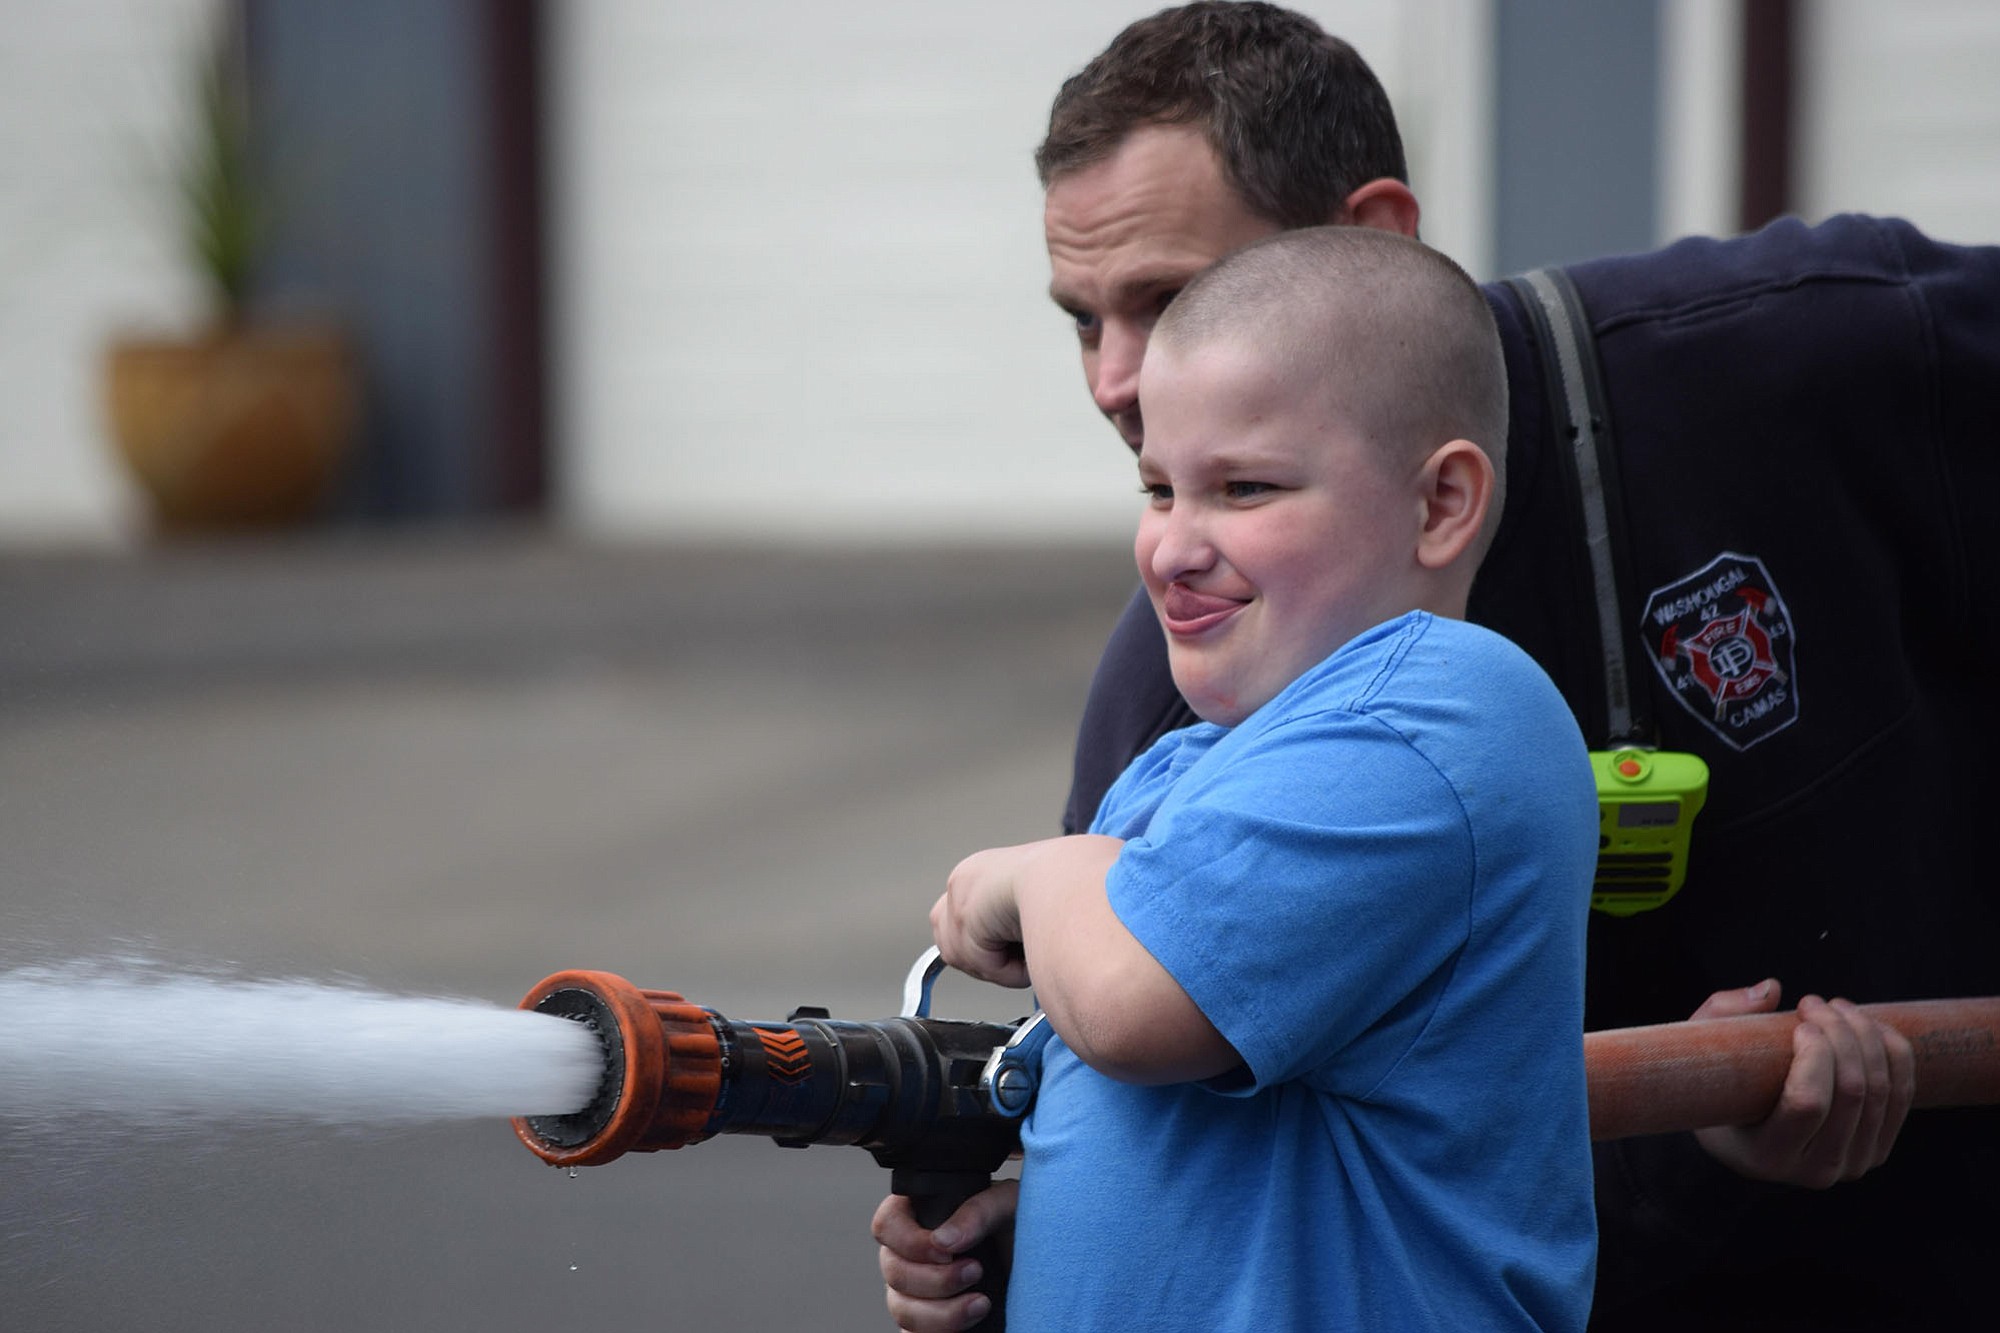 Washougal: Gaerett Bailey learned to use a fire hose from a local firefighter as part of Hathaway Elementary School's Young Men In Action program.